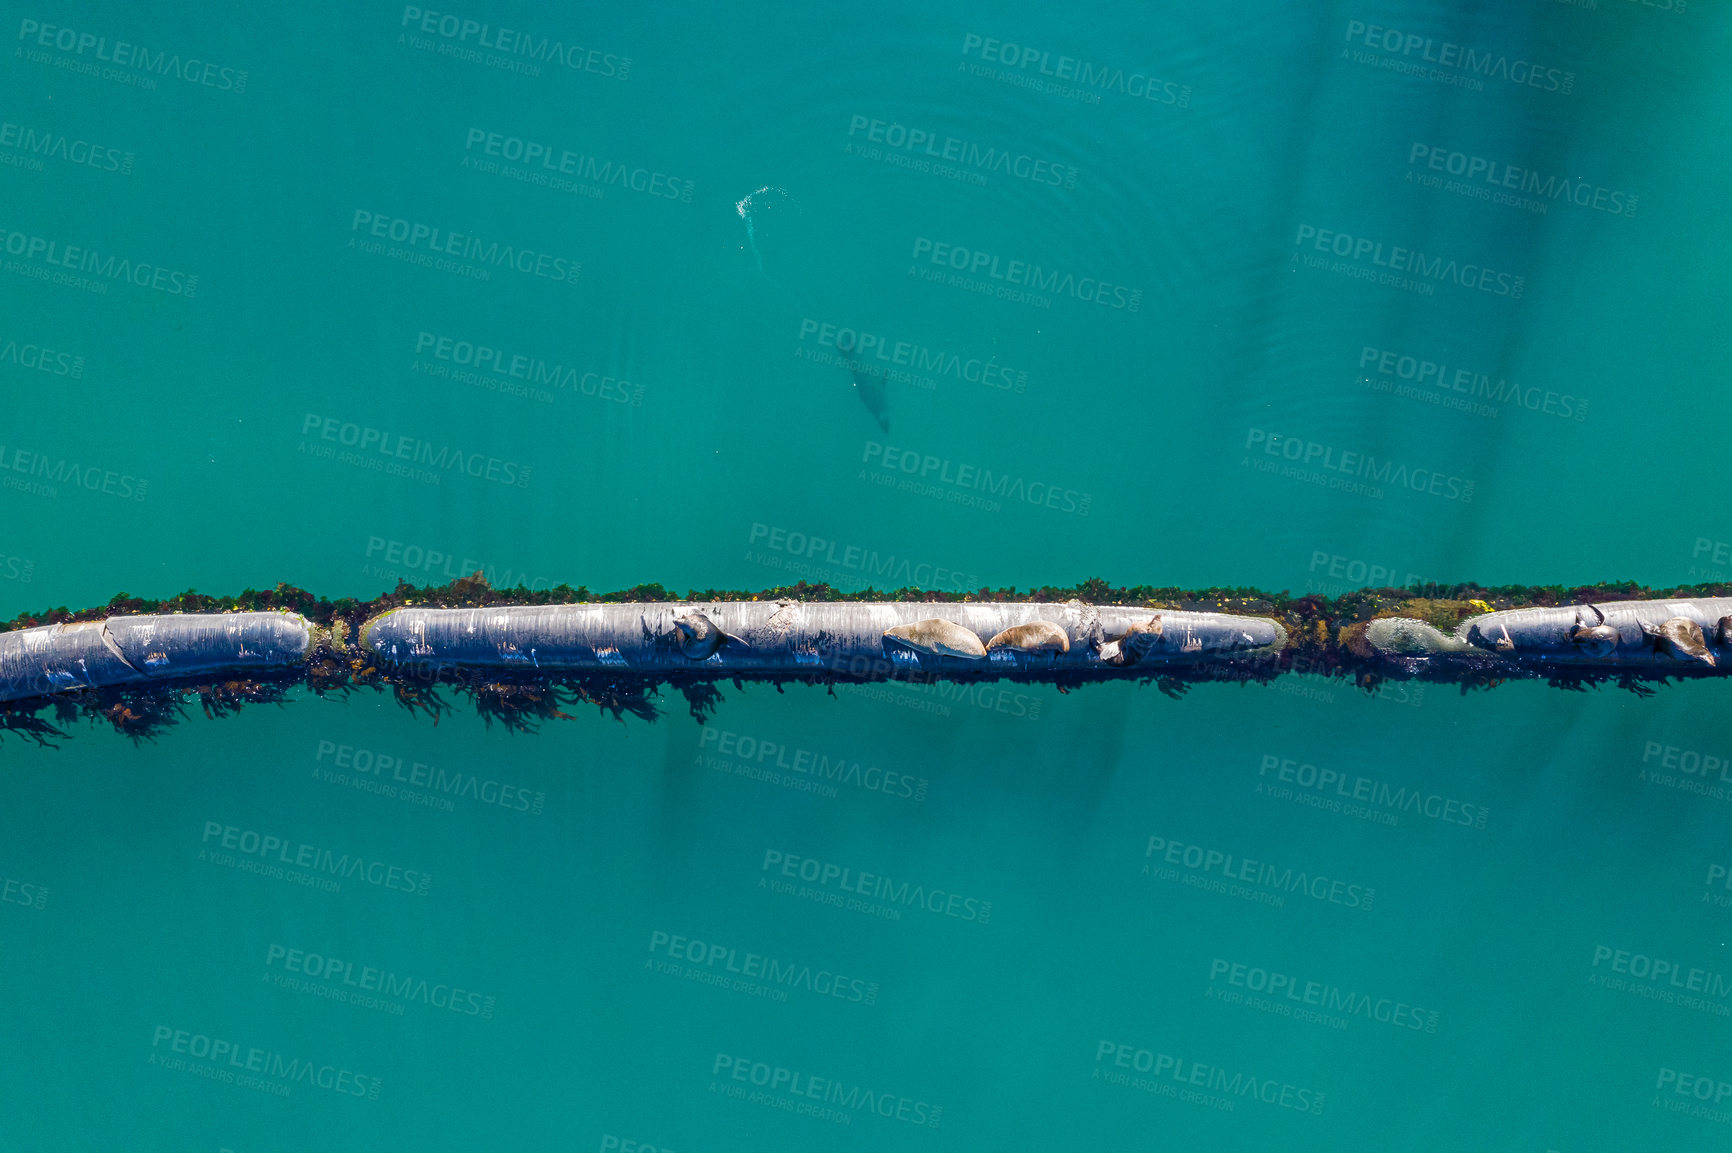 Buy stock photo Aerial, marine and pipeline in ocean or sea, animals and seals on export pipe for fuel or gas transportation. Industrial, water and corrosion resistant steel, offshore or environmental impacts